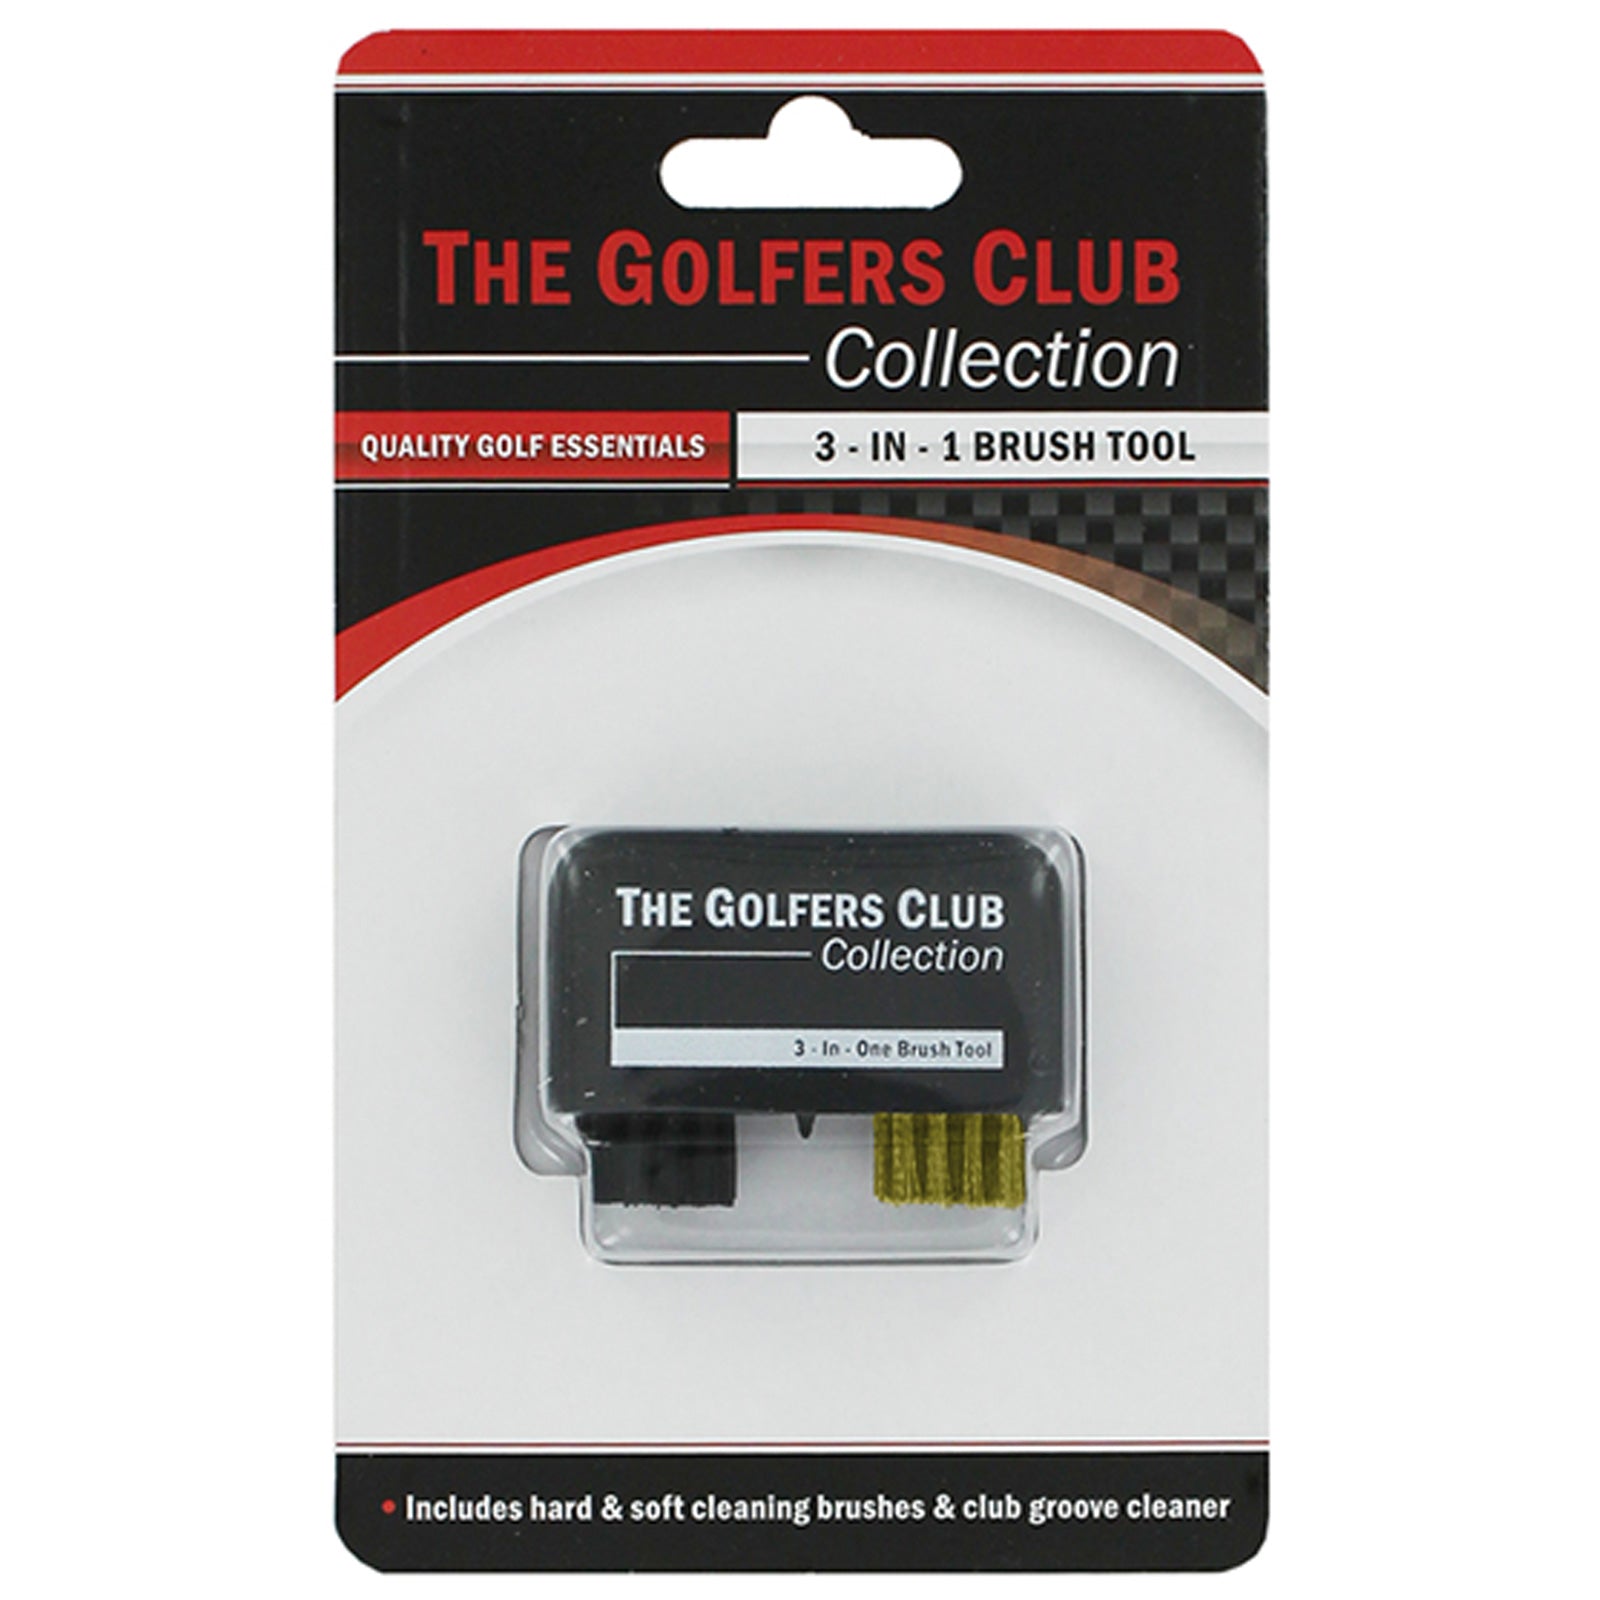 Golfers Club Collection 3-in-1 Brush Tool